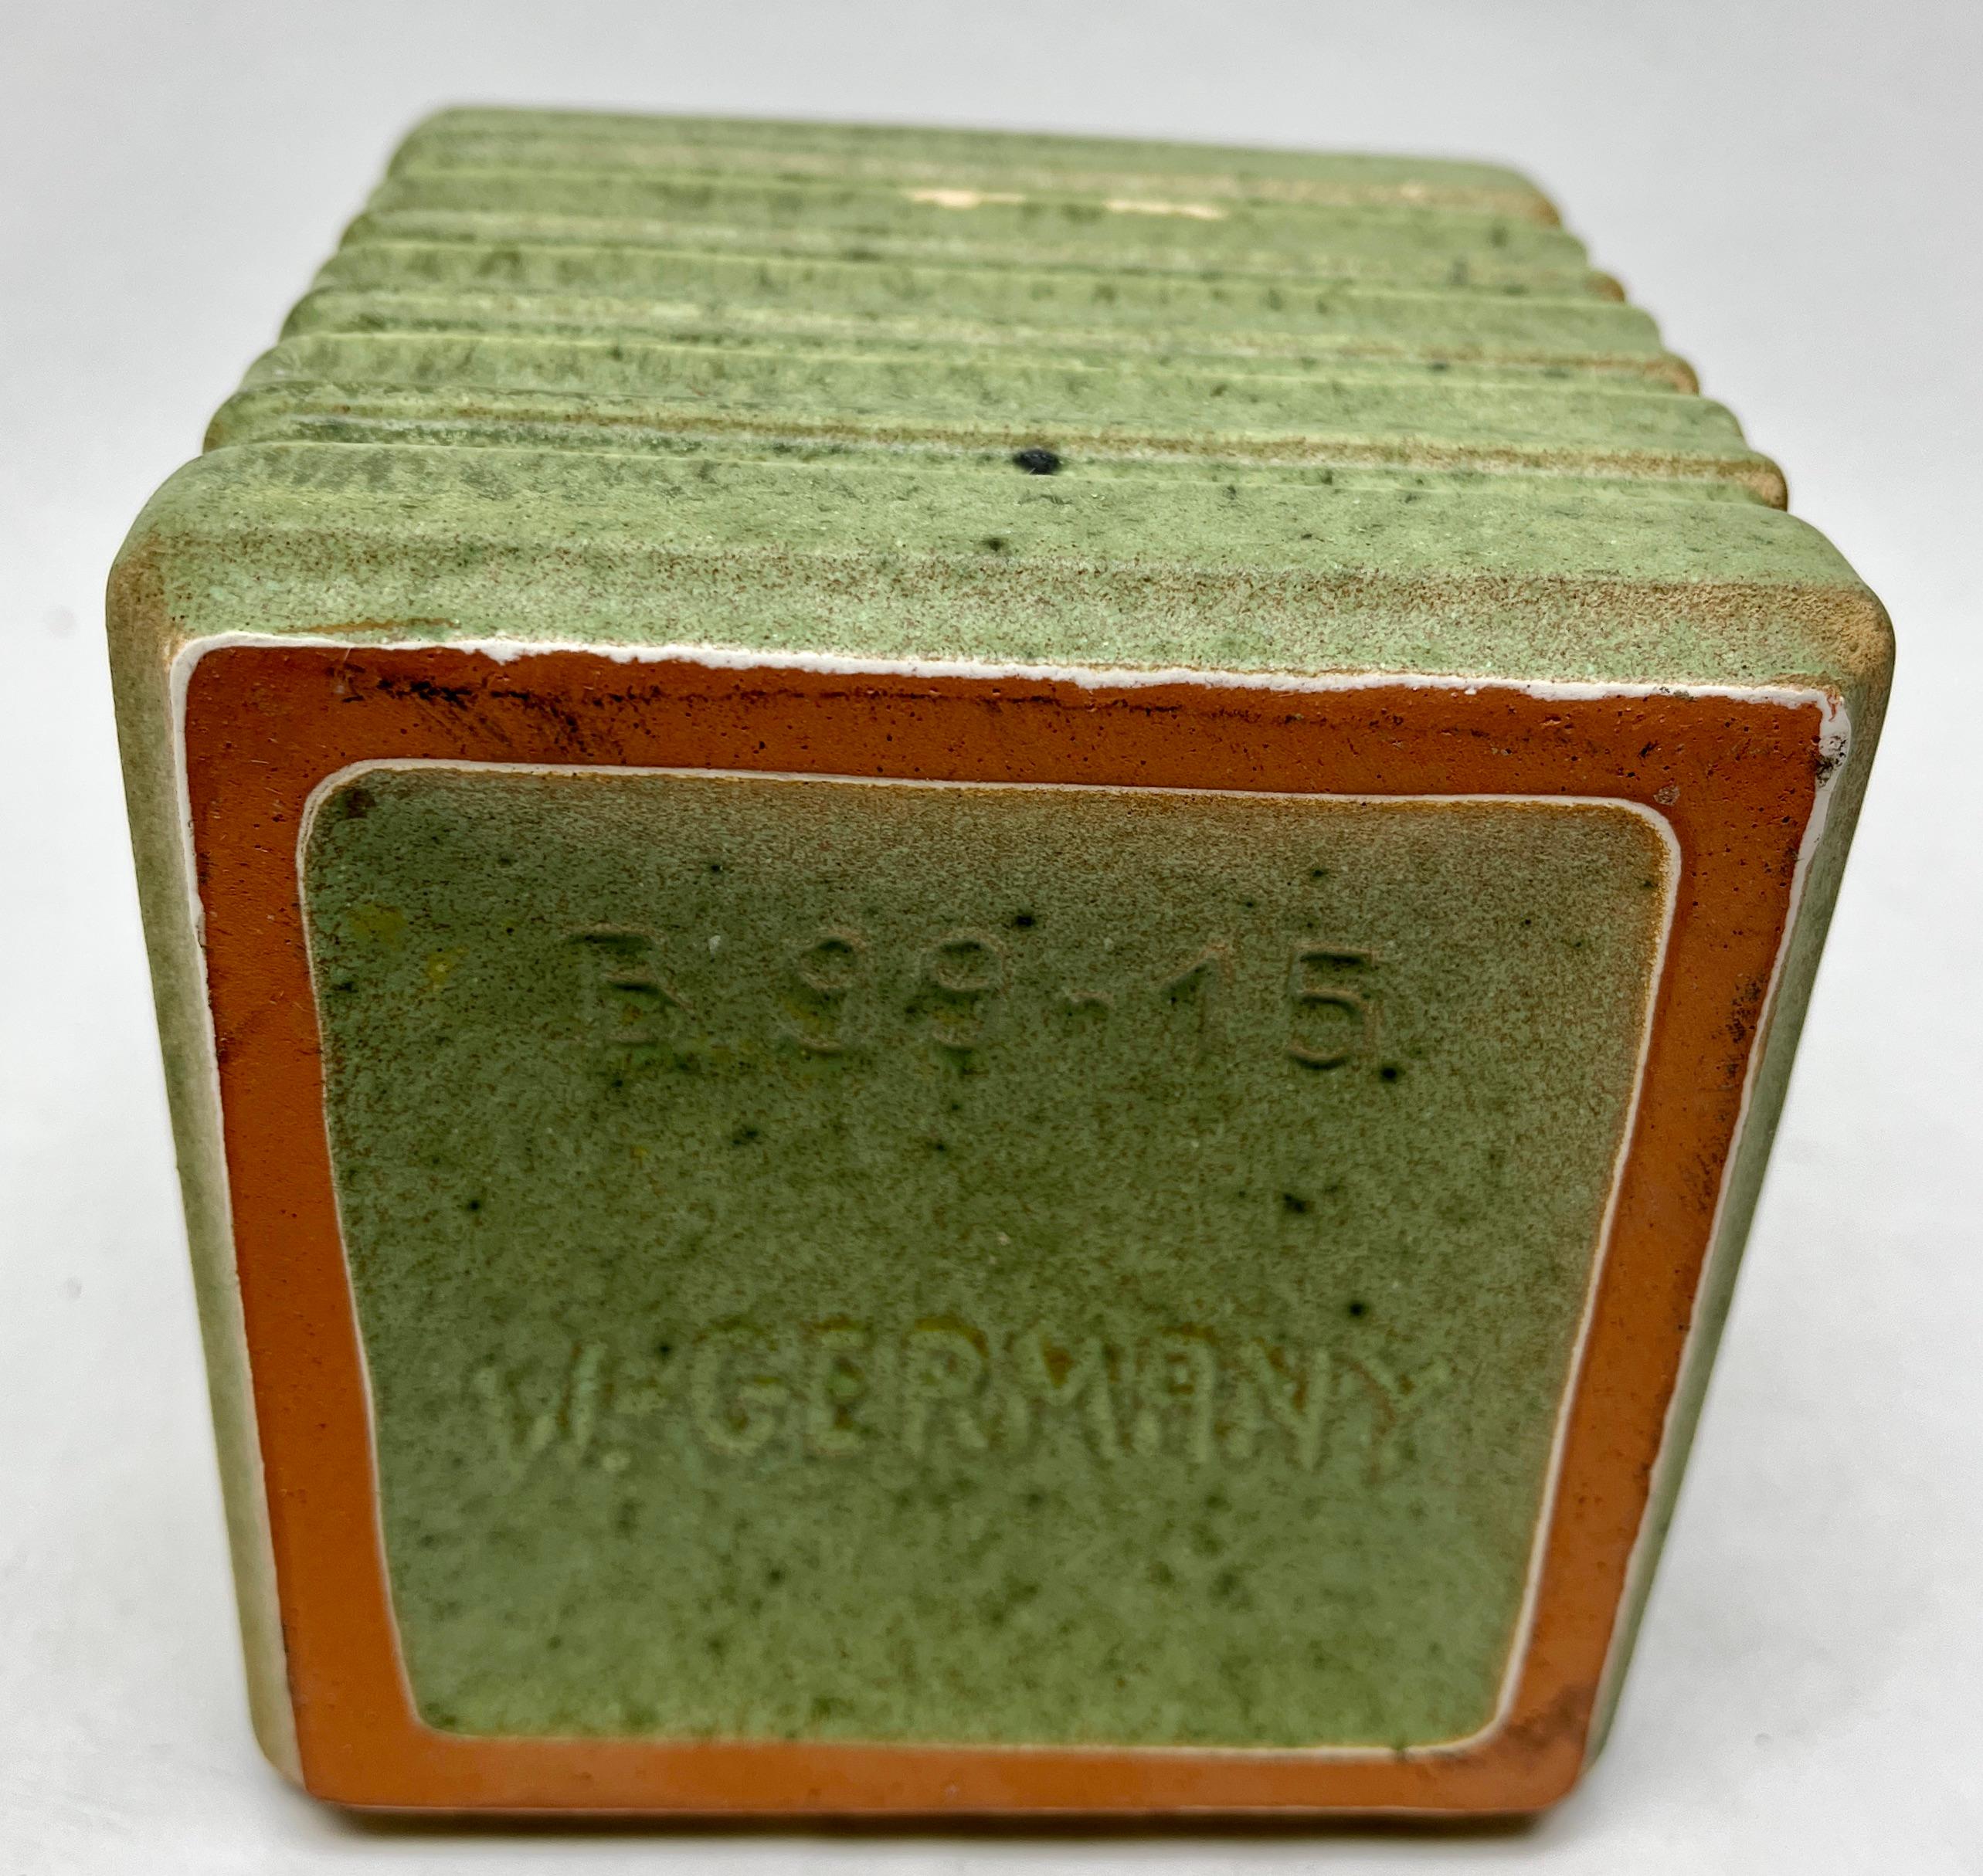 20th Century Fat Lava Rectangular Vase with Decor and Stamp 399-15, W-Germany' 1960s For Sale